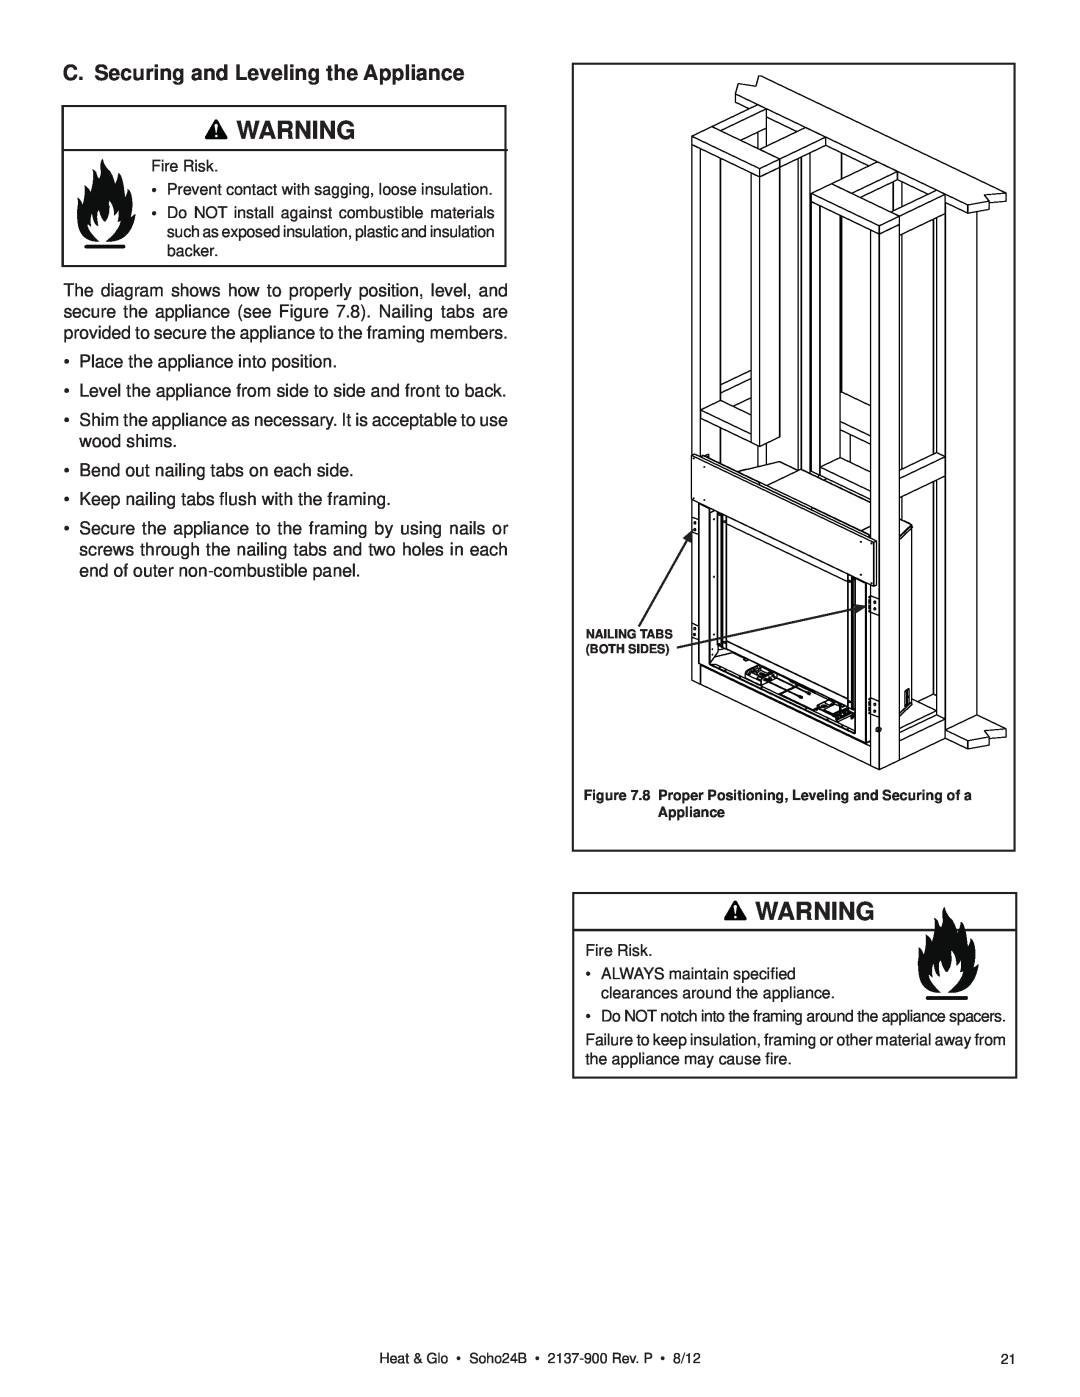 Heat & Glo LifeStyle 2137-900 owner manual C. Securing and Leveling the Appliance 